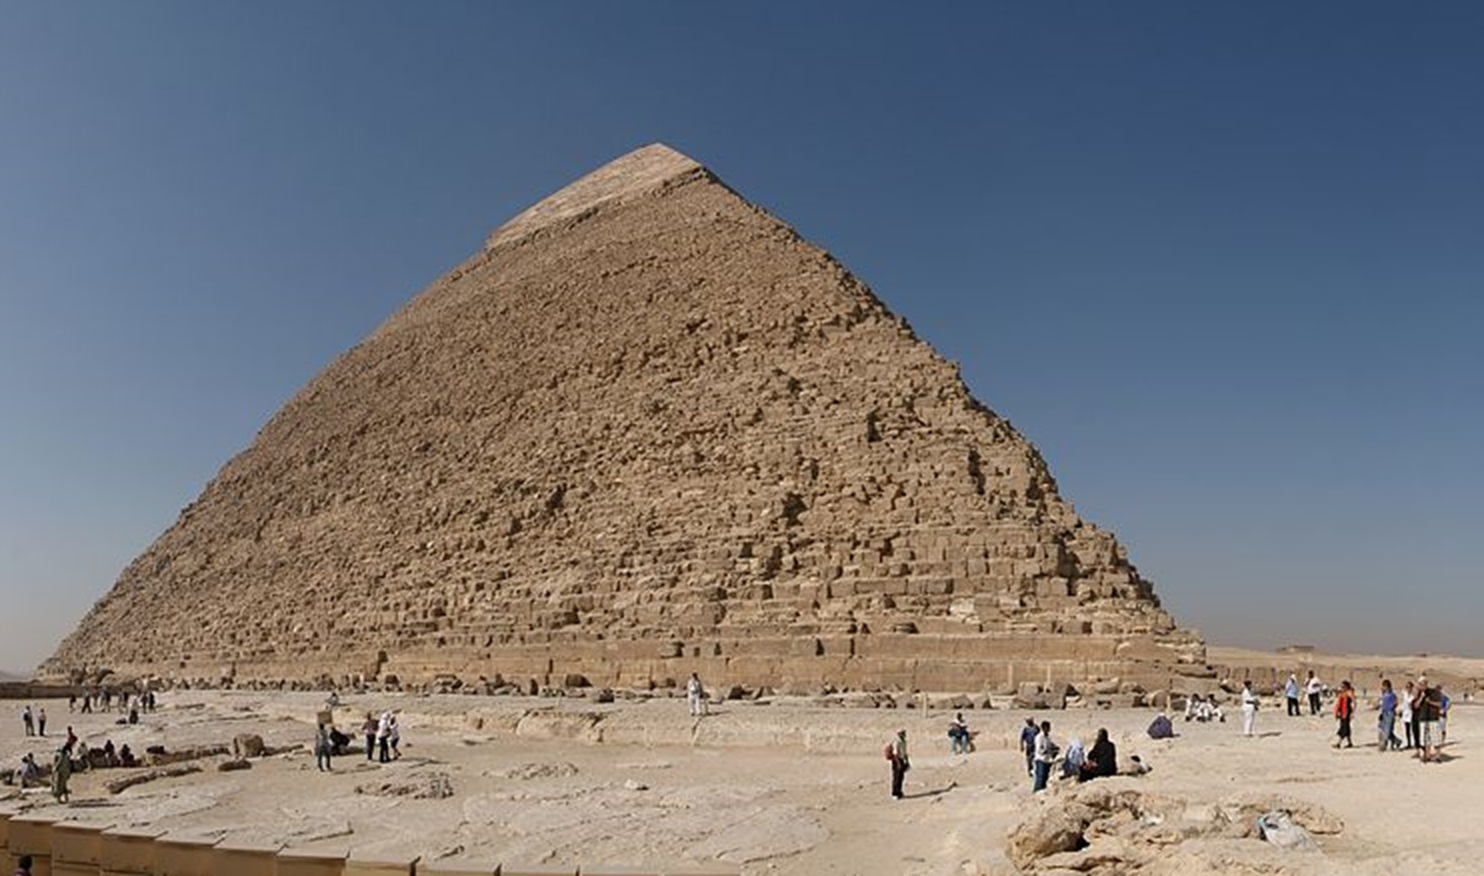 <p>Obviously, it can't be denied that the pyramids are awe-inspiring. They are markers of human history that are difficult for us to grasp—and viewing them can be a surreal experience. However,<strong> there are some problems tourists should be aware of.</strong></p>